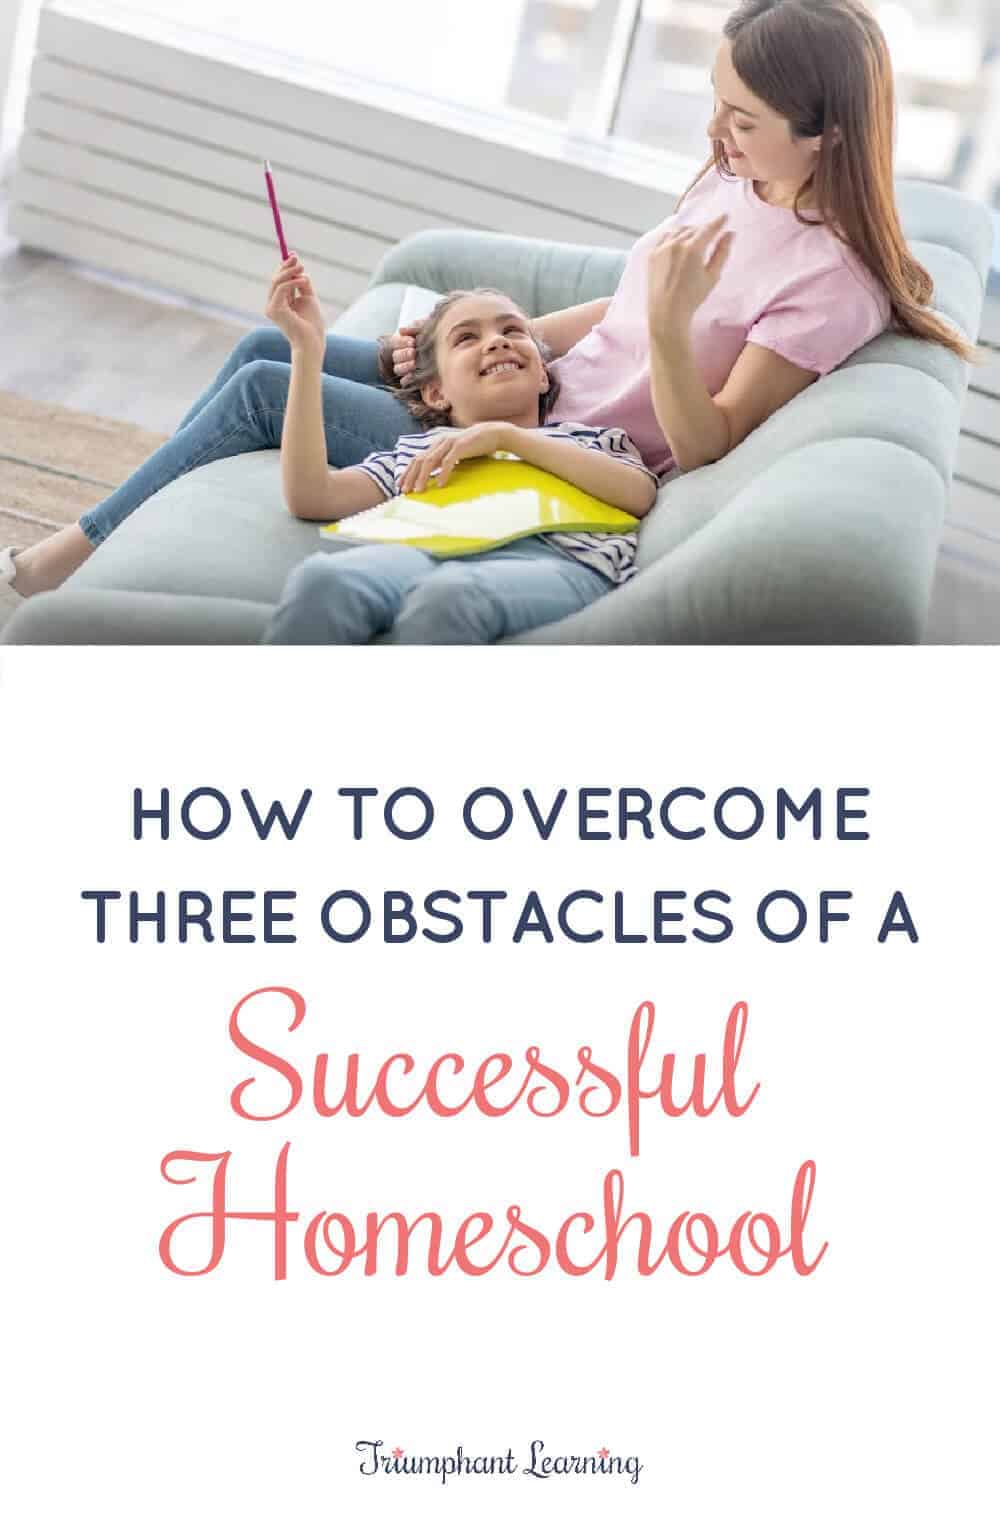 These strategies can help you overcome three common roadblocks that prevent many families from having a successful homeschool! via @TriLearning